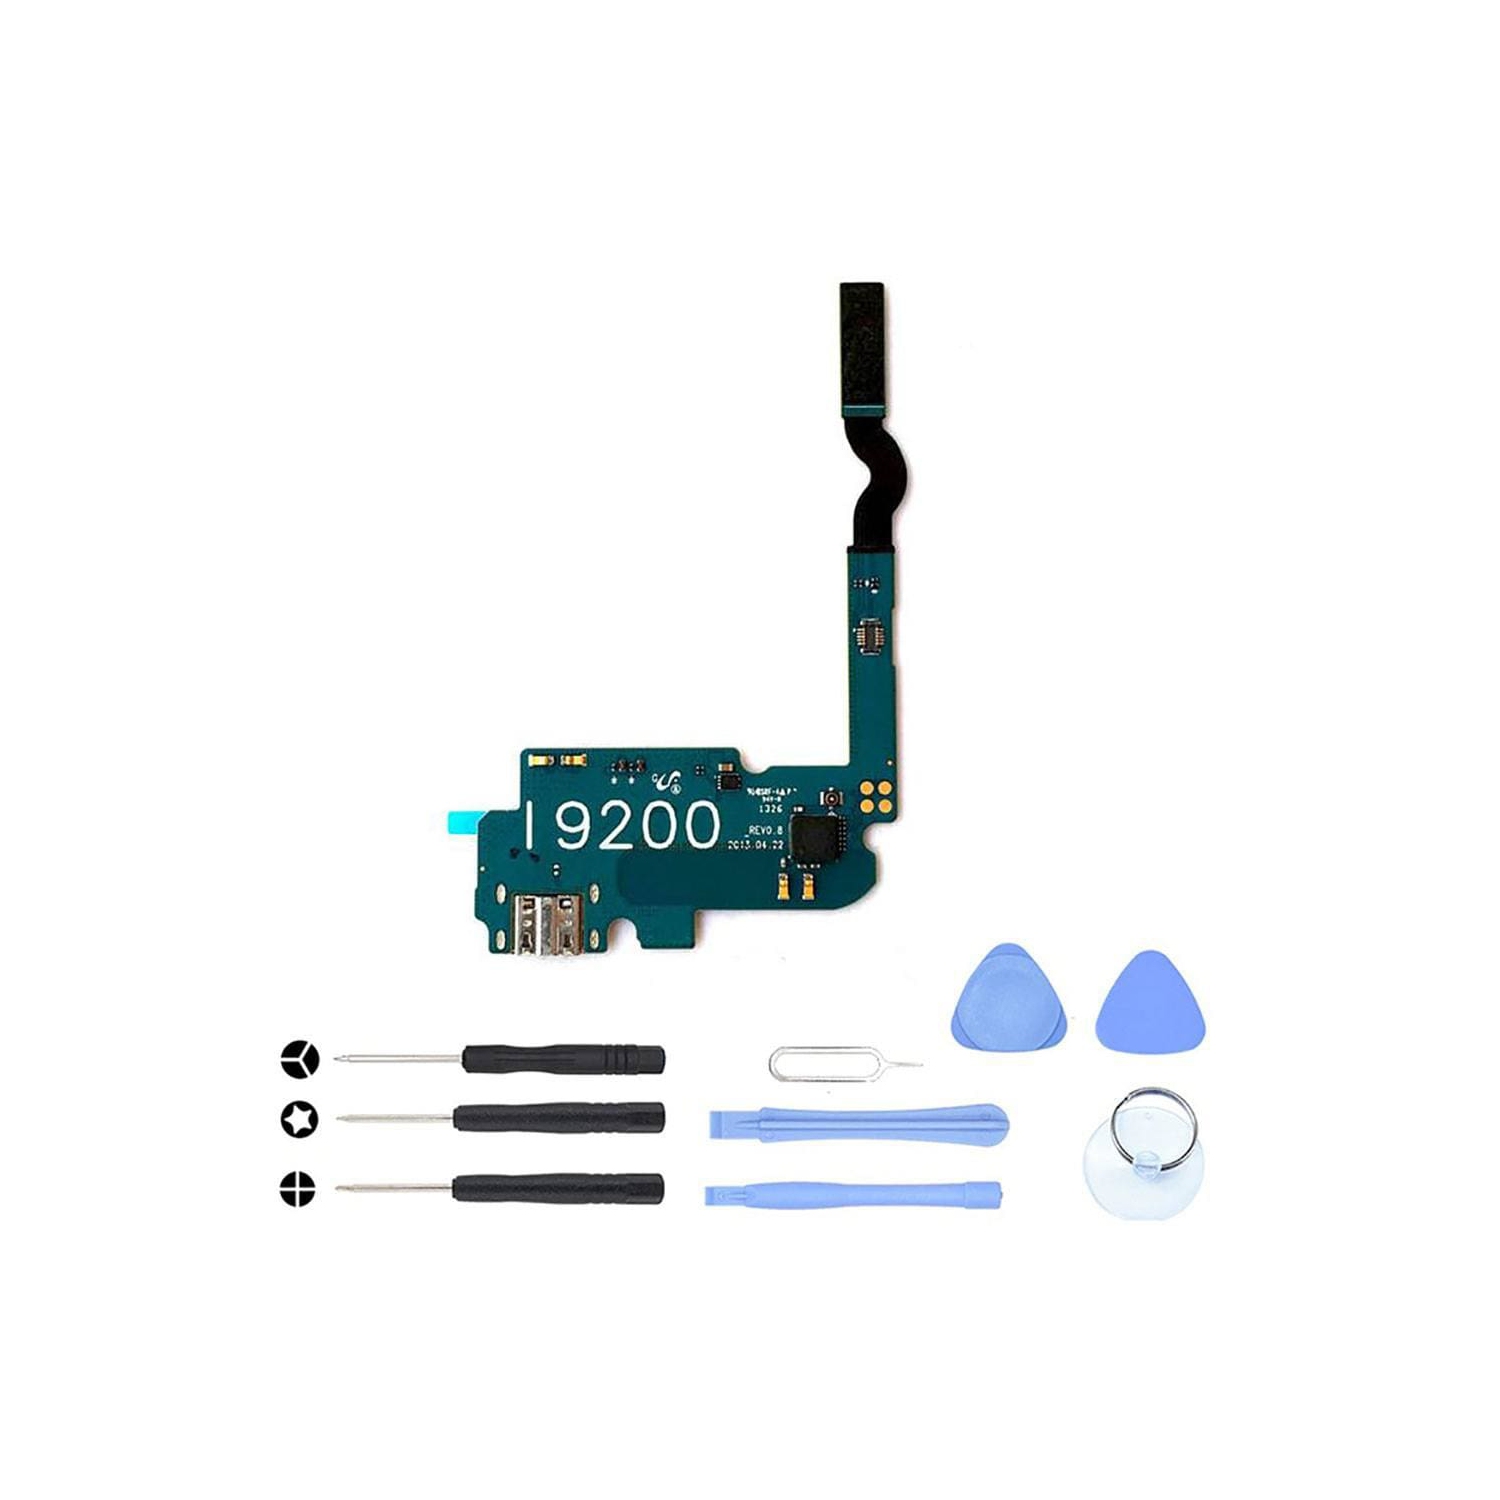 Charging port flex cable and microphone for Samsung Galaxy Mega 6.3 GT-i9200